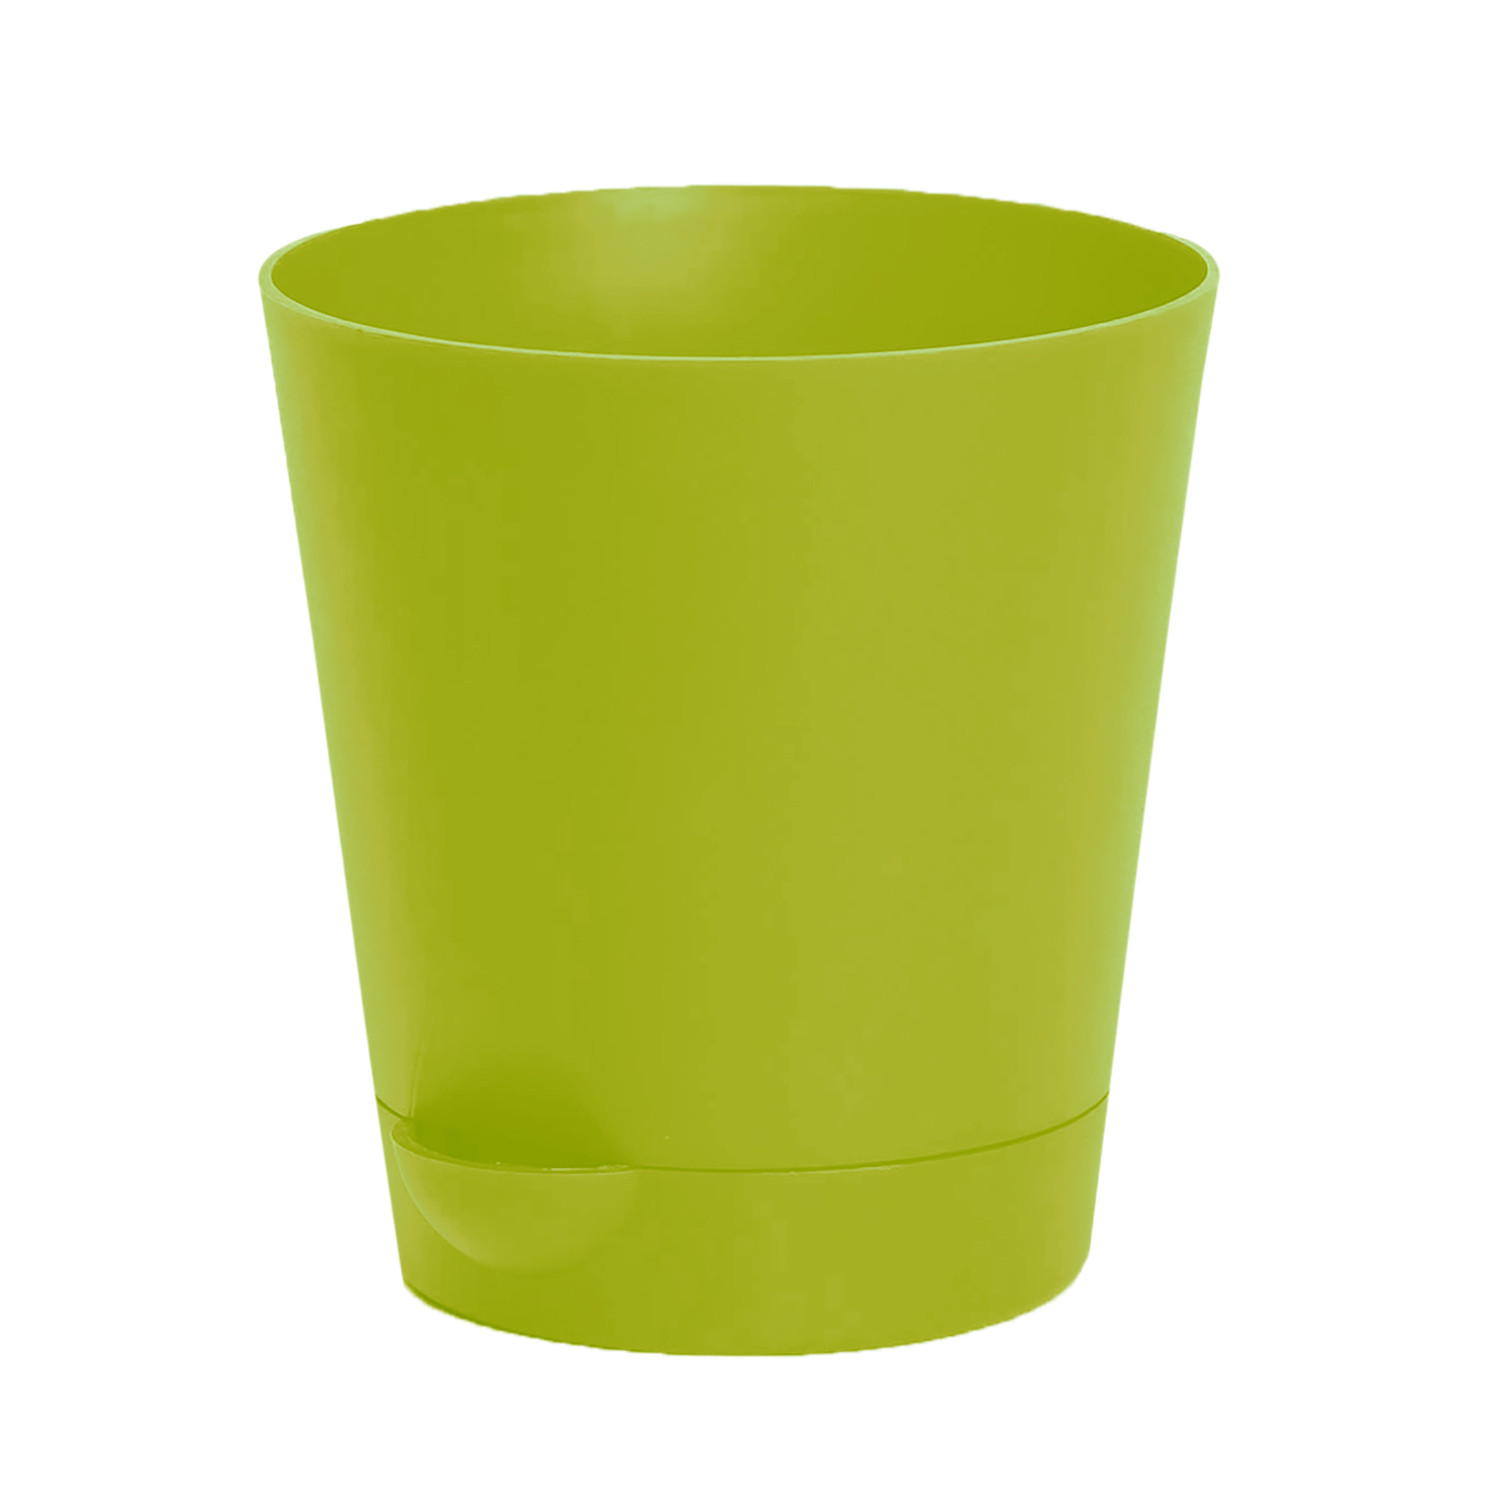 Kuber Industries Plastic Titan Pot|Garden Container For Plants & Flowers|Self-Watering Pot With Drainage Holes,6 Inch (Green)